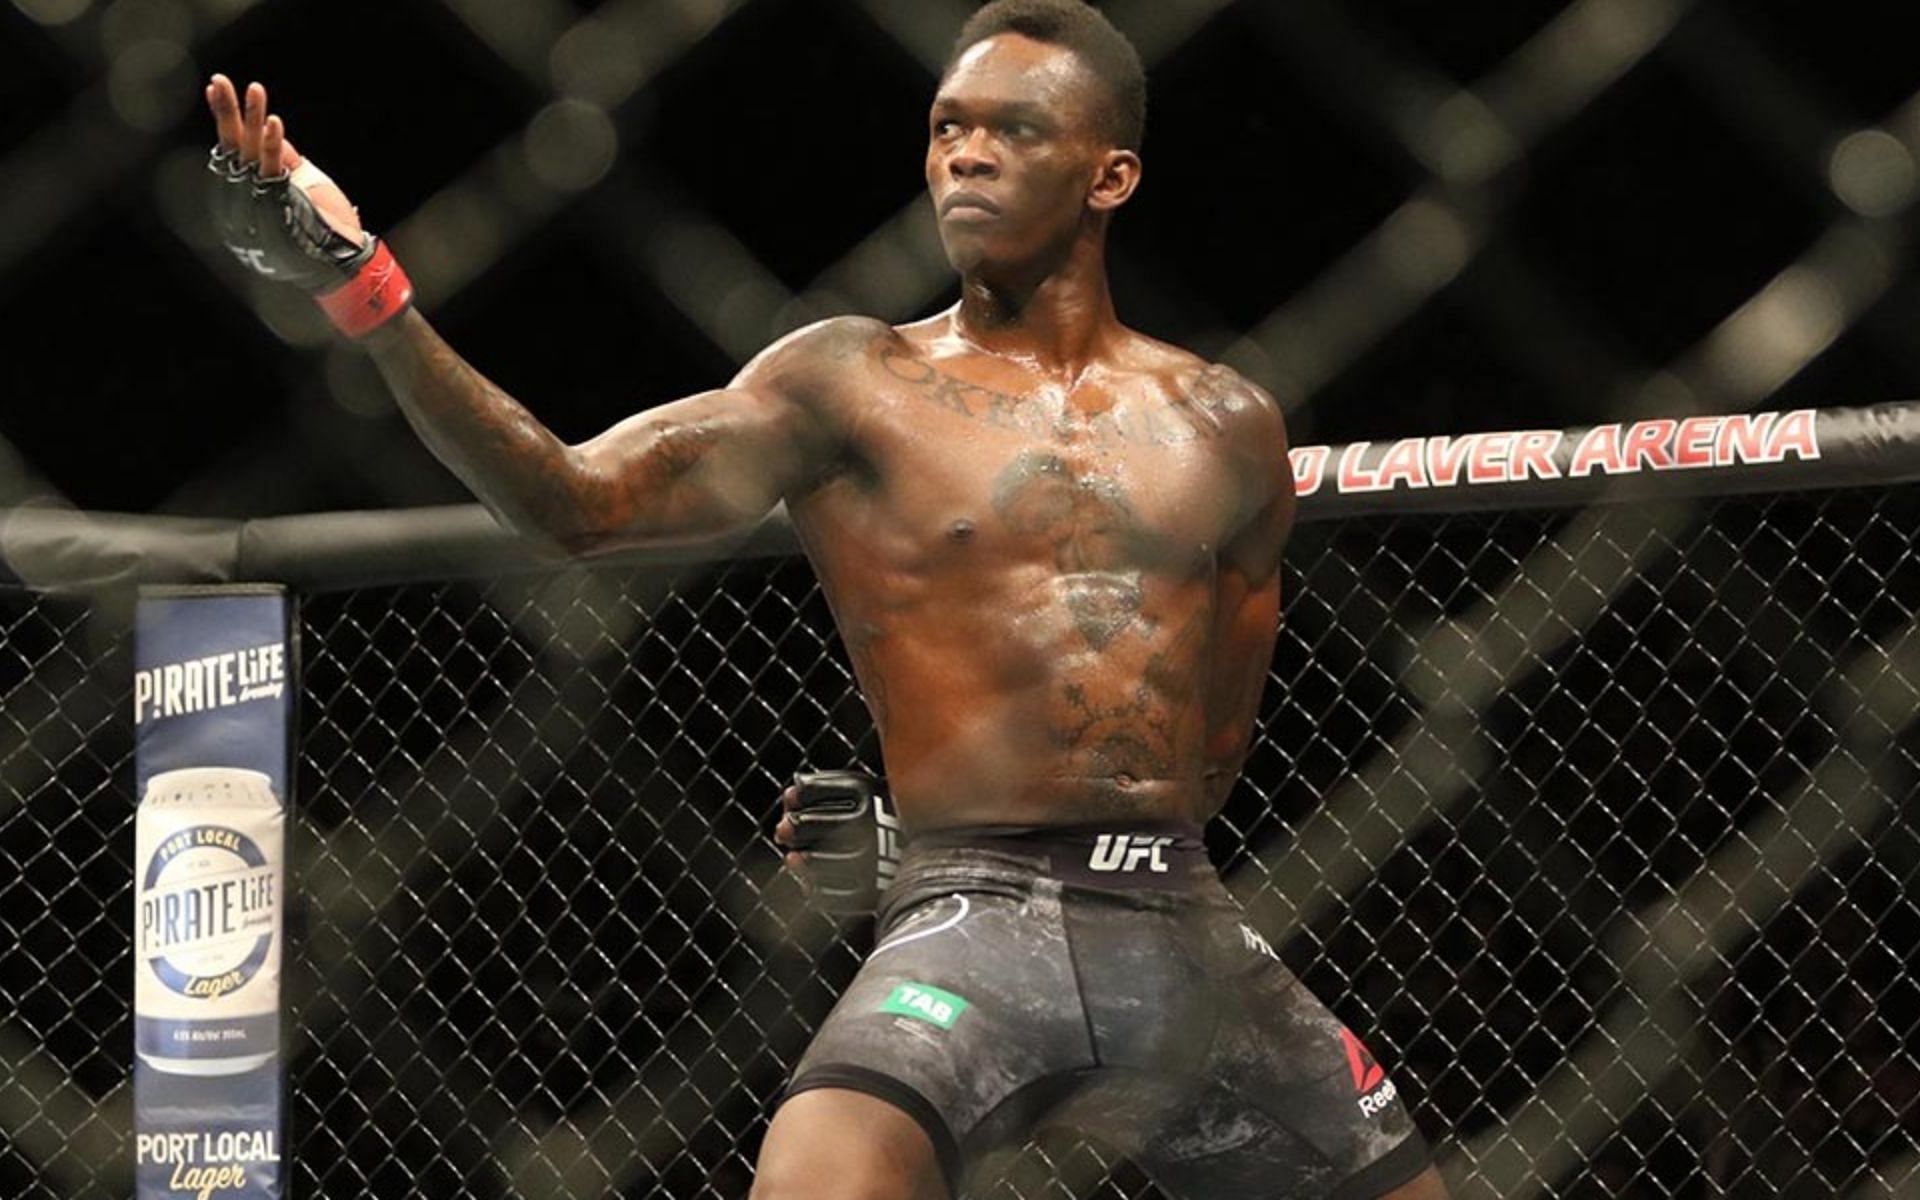 There will be no shortage of potential opponents for Israel Adesanya this year